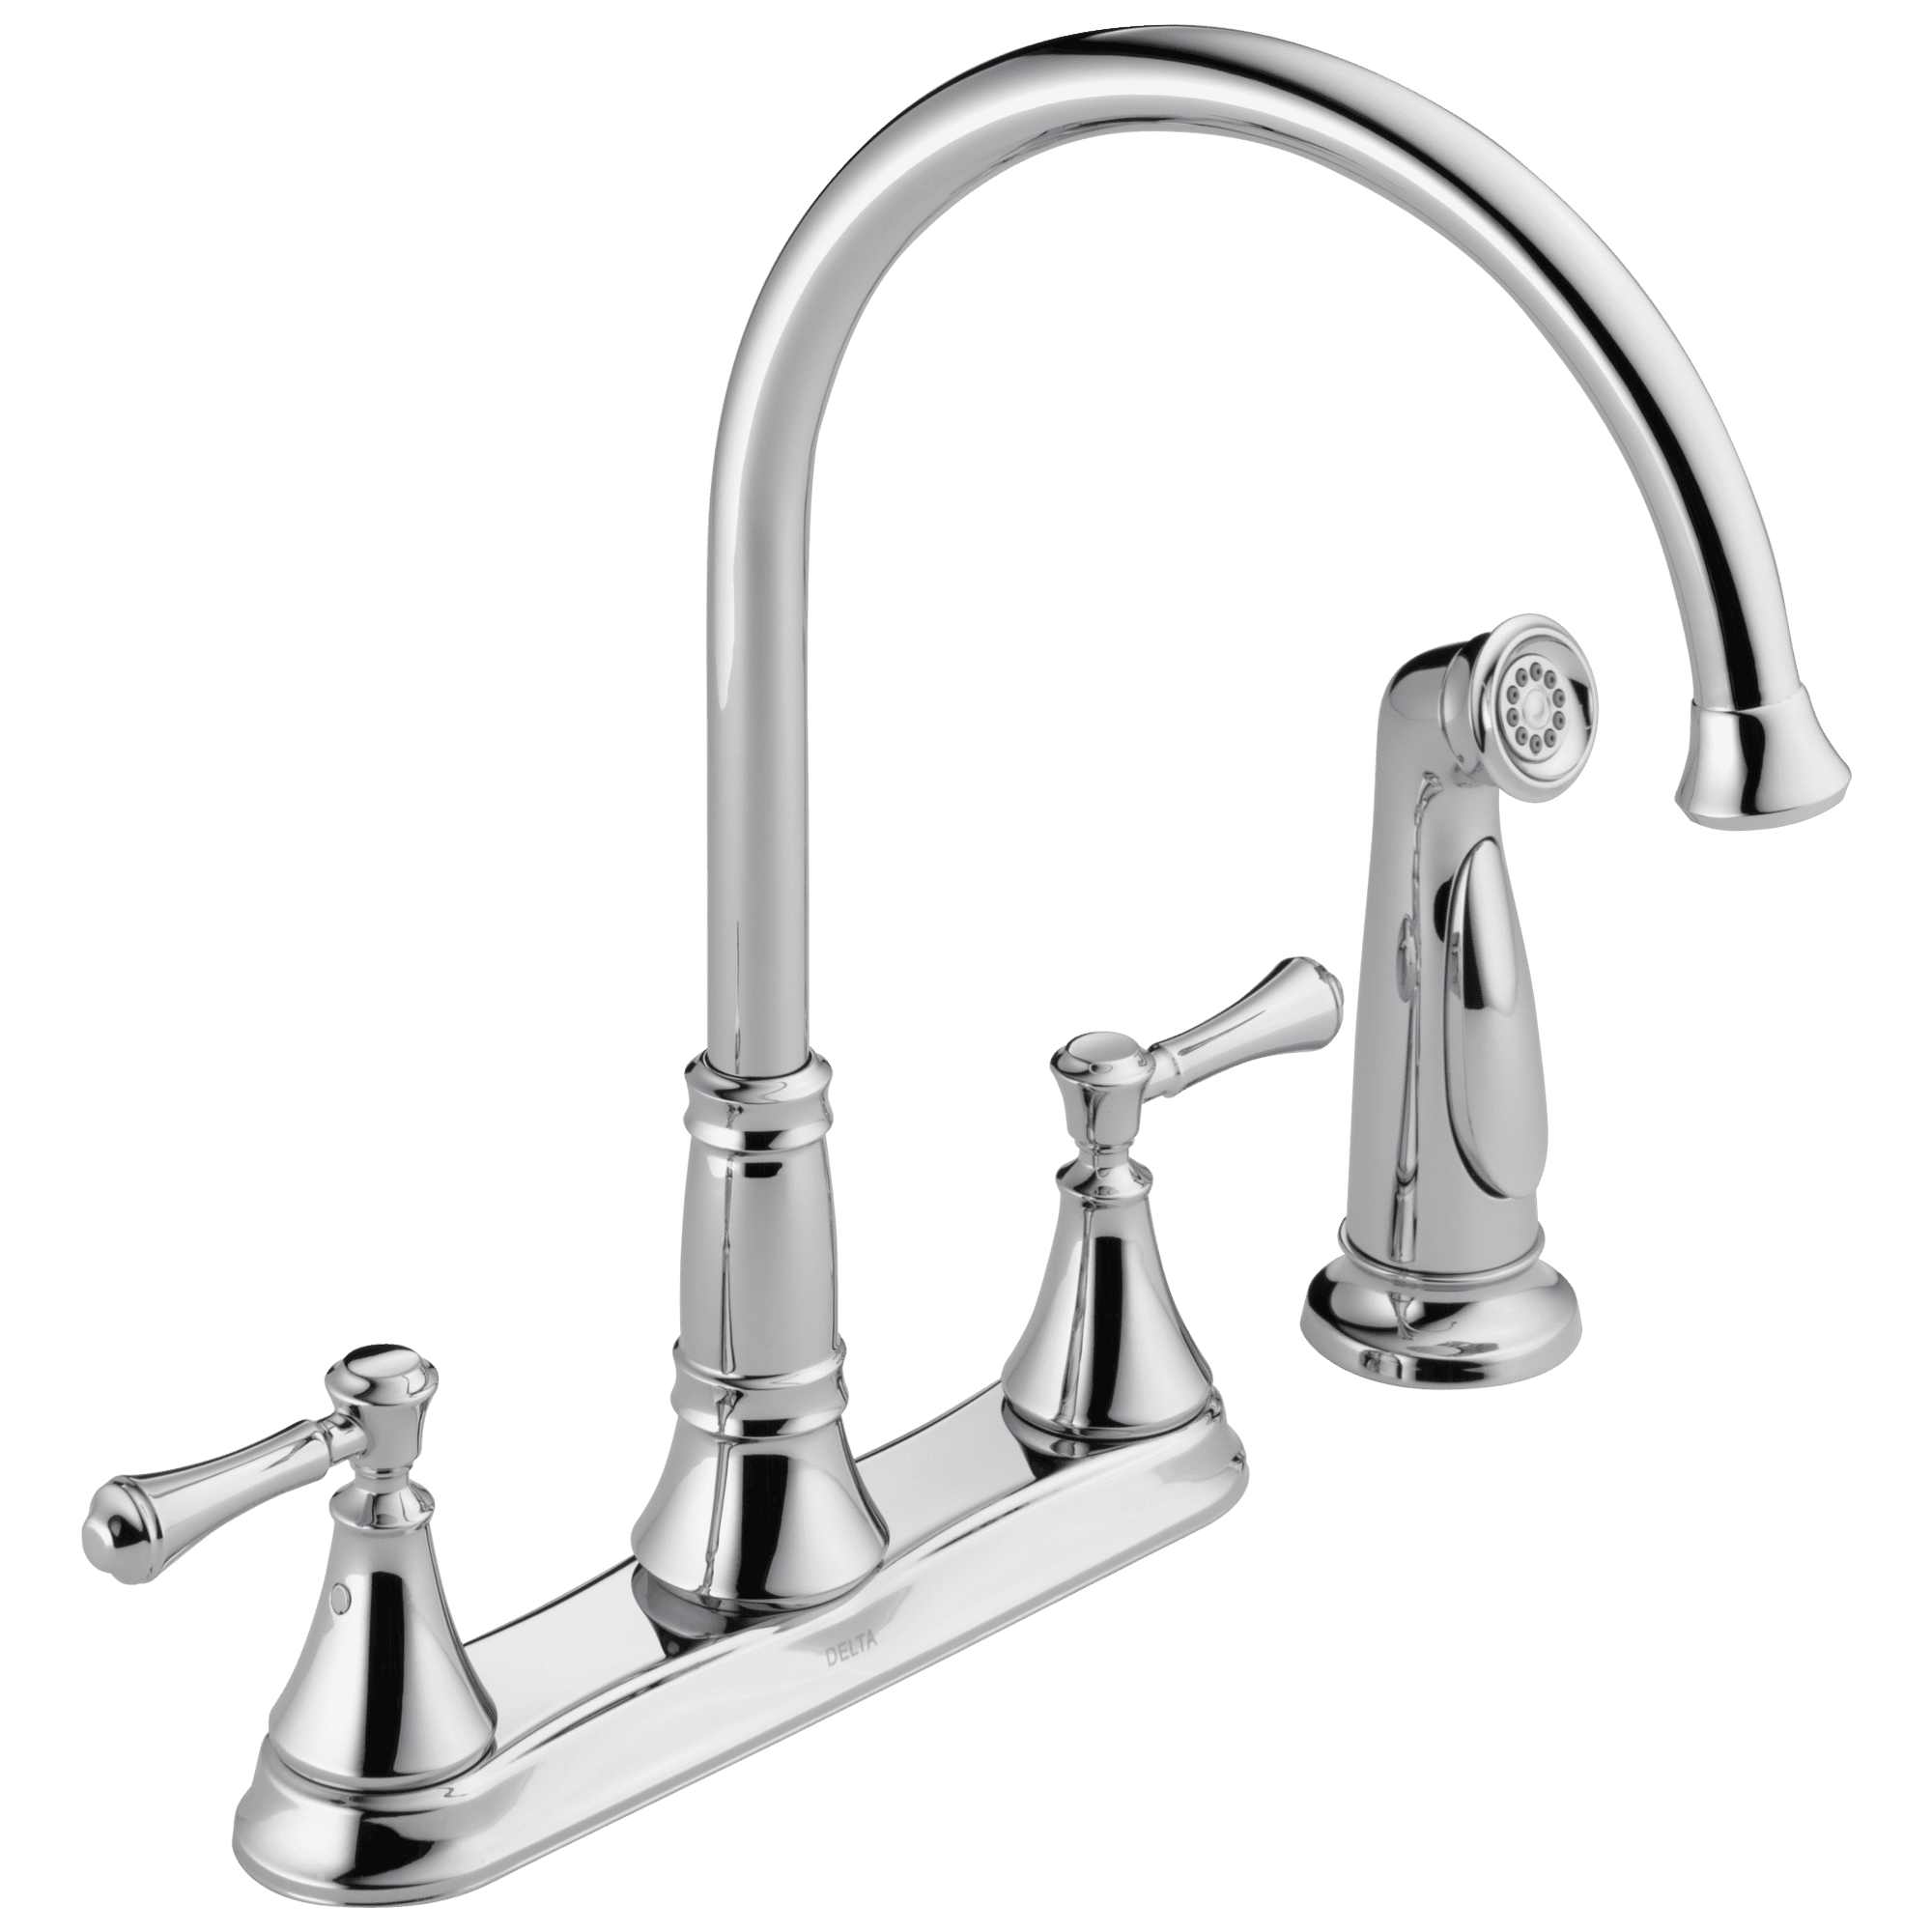 Classic Elegance 13.5" Chrome Brass Kitchen Faucet with Side Spray